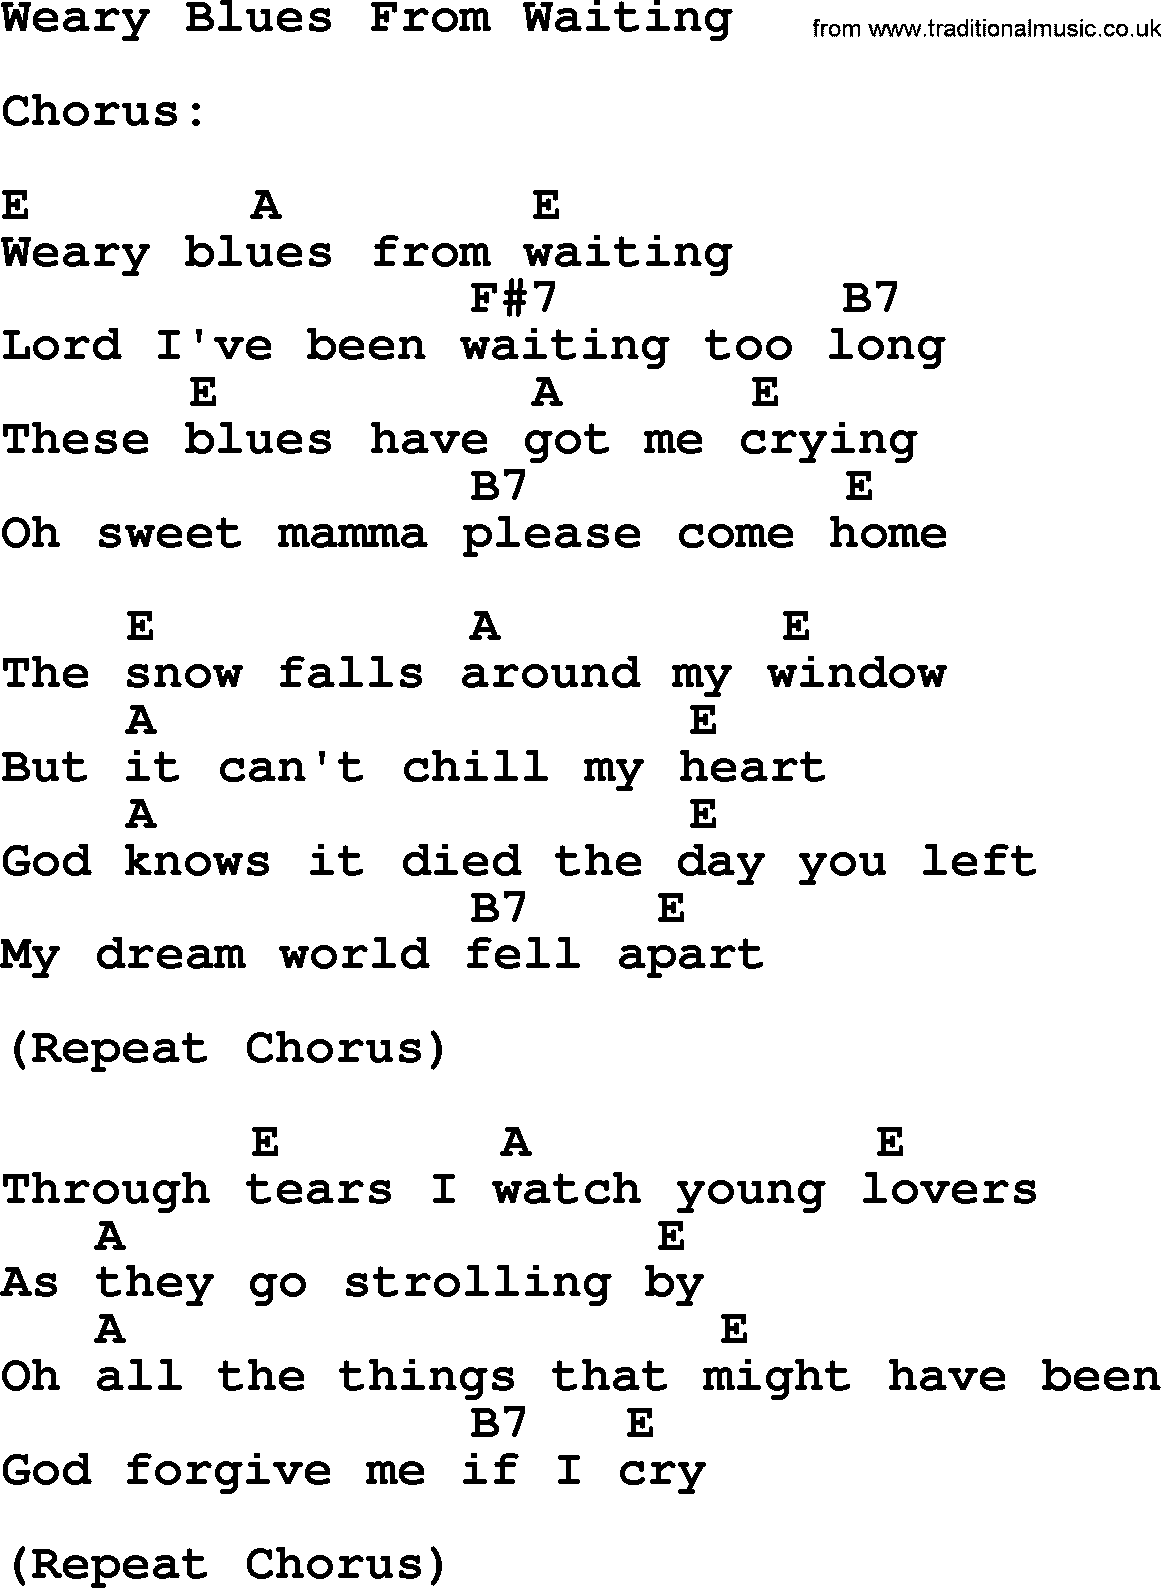 Hank Williams song Weary Blues From Waiting, lyrics and chords